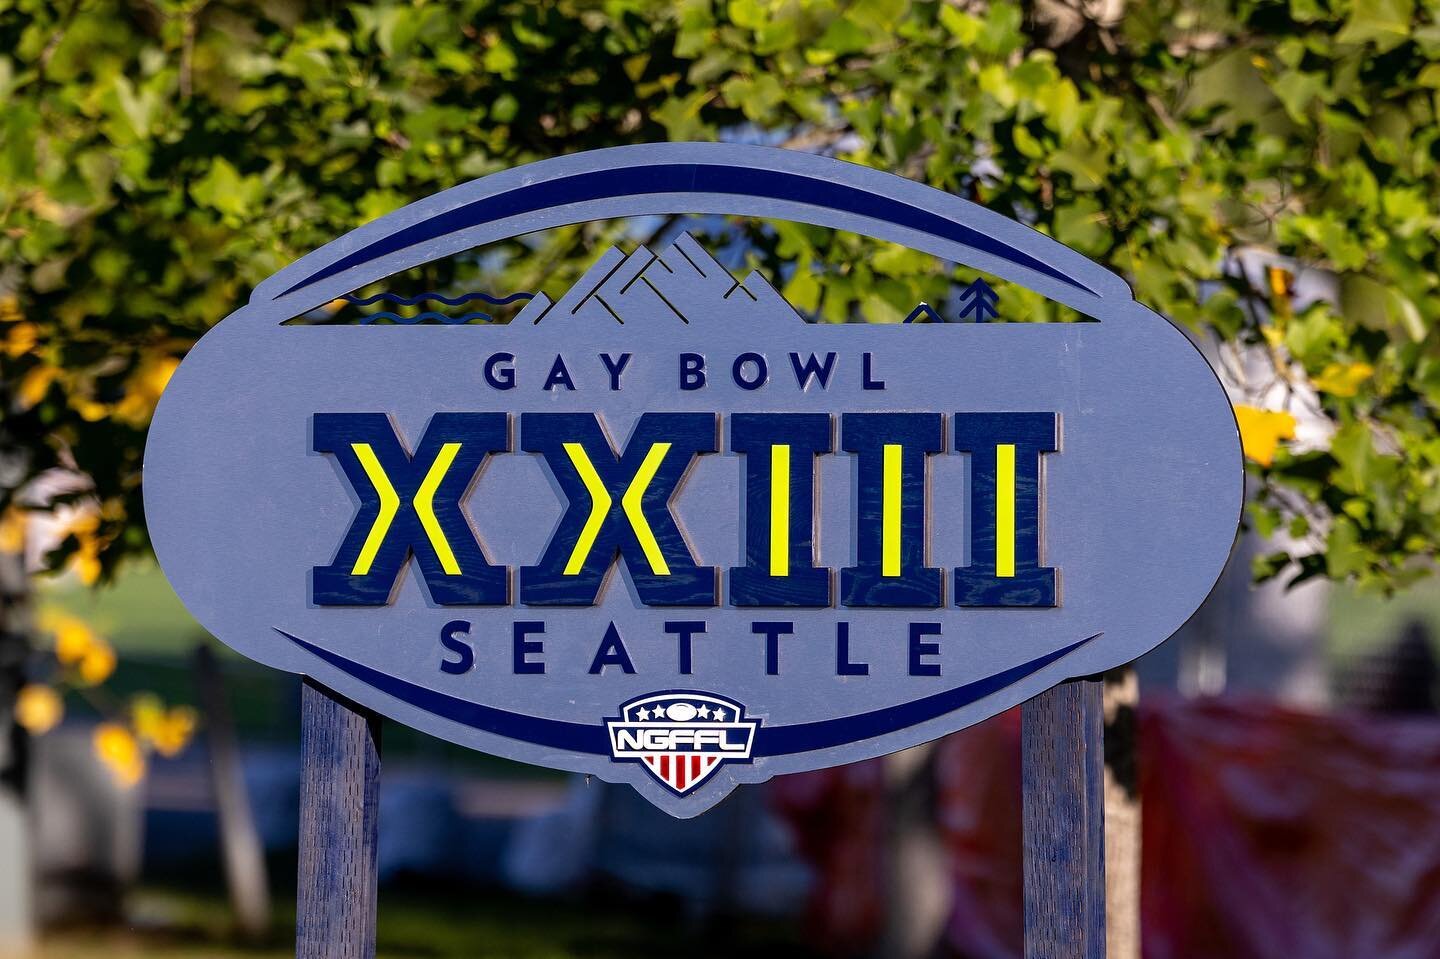 Thanks to our very own retired Zebra, Brian Bates (@brianbatesphotos) Gay Bowl XXIII Photos are now available!

All photos in this album are medium resolution images that can be downloaded at no cost.  There is a &ldquo;store&rdquo; for purchase if y